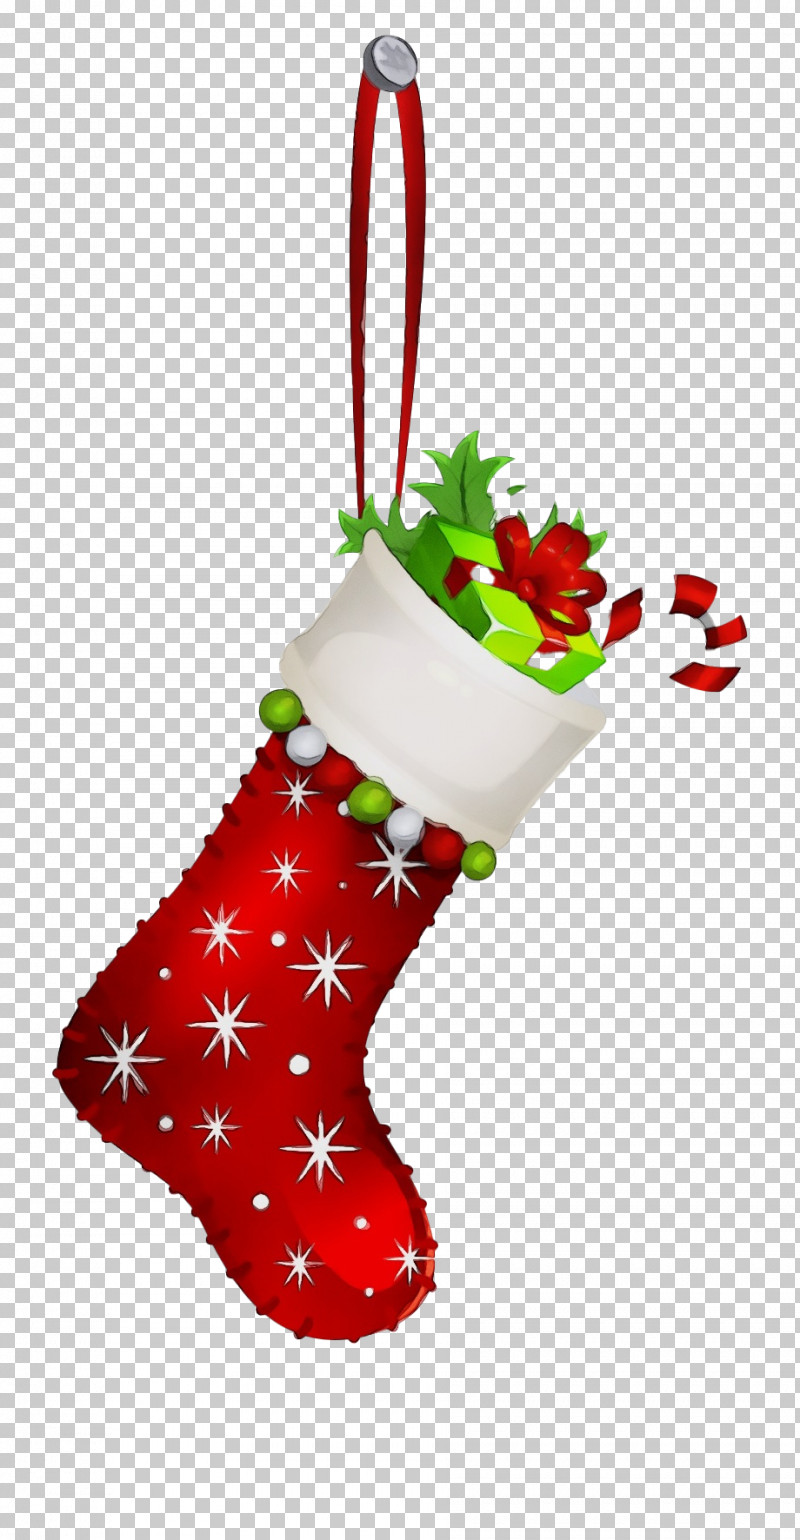 Christmas Ornament PNG, Clipart, Biology, Candy Cane, Christmas Day, Christmas Ornament, Christmas Stocking Free PNG Download